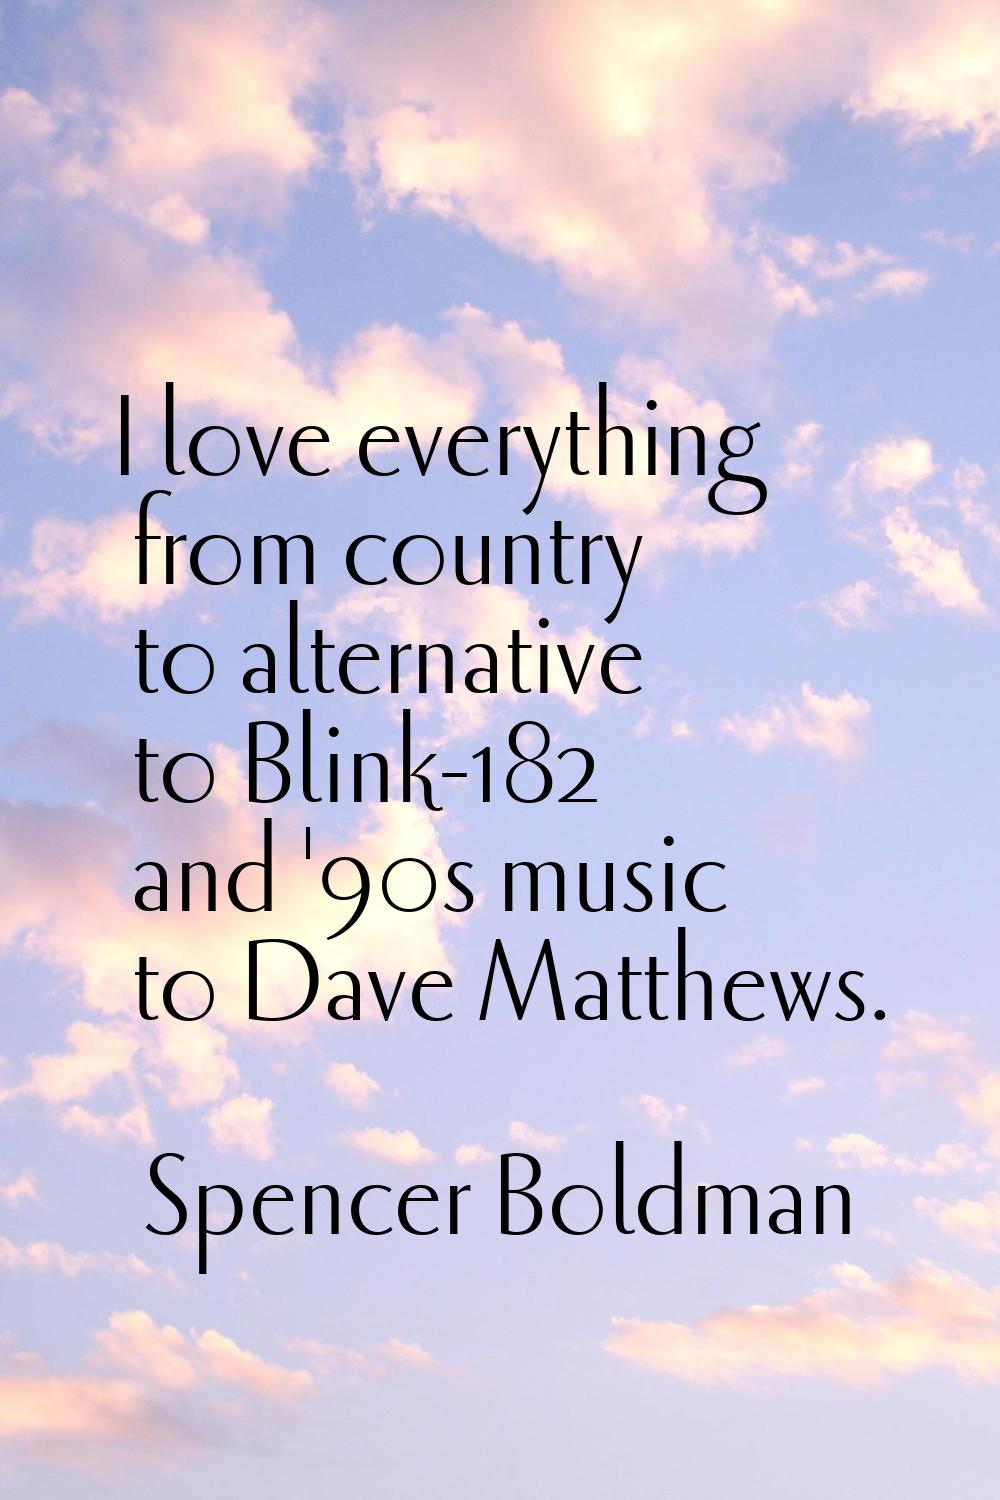 I love everything from country to alternative to Blink-182 and '90s music to Dave Matthews.